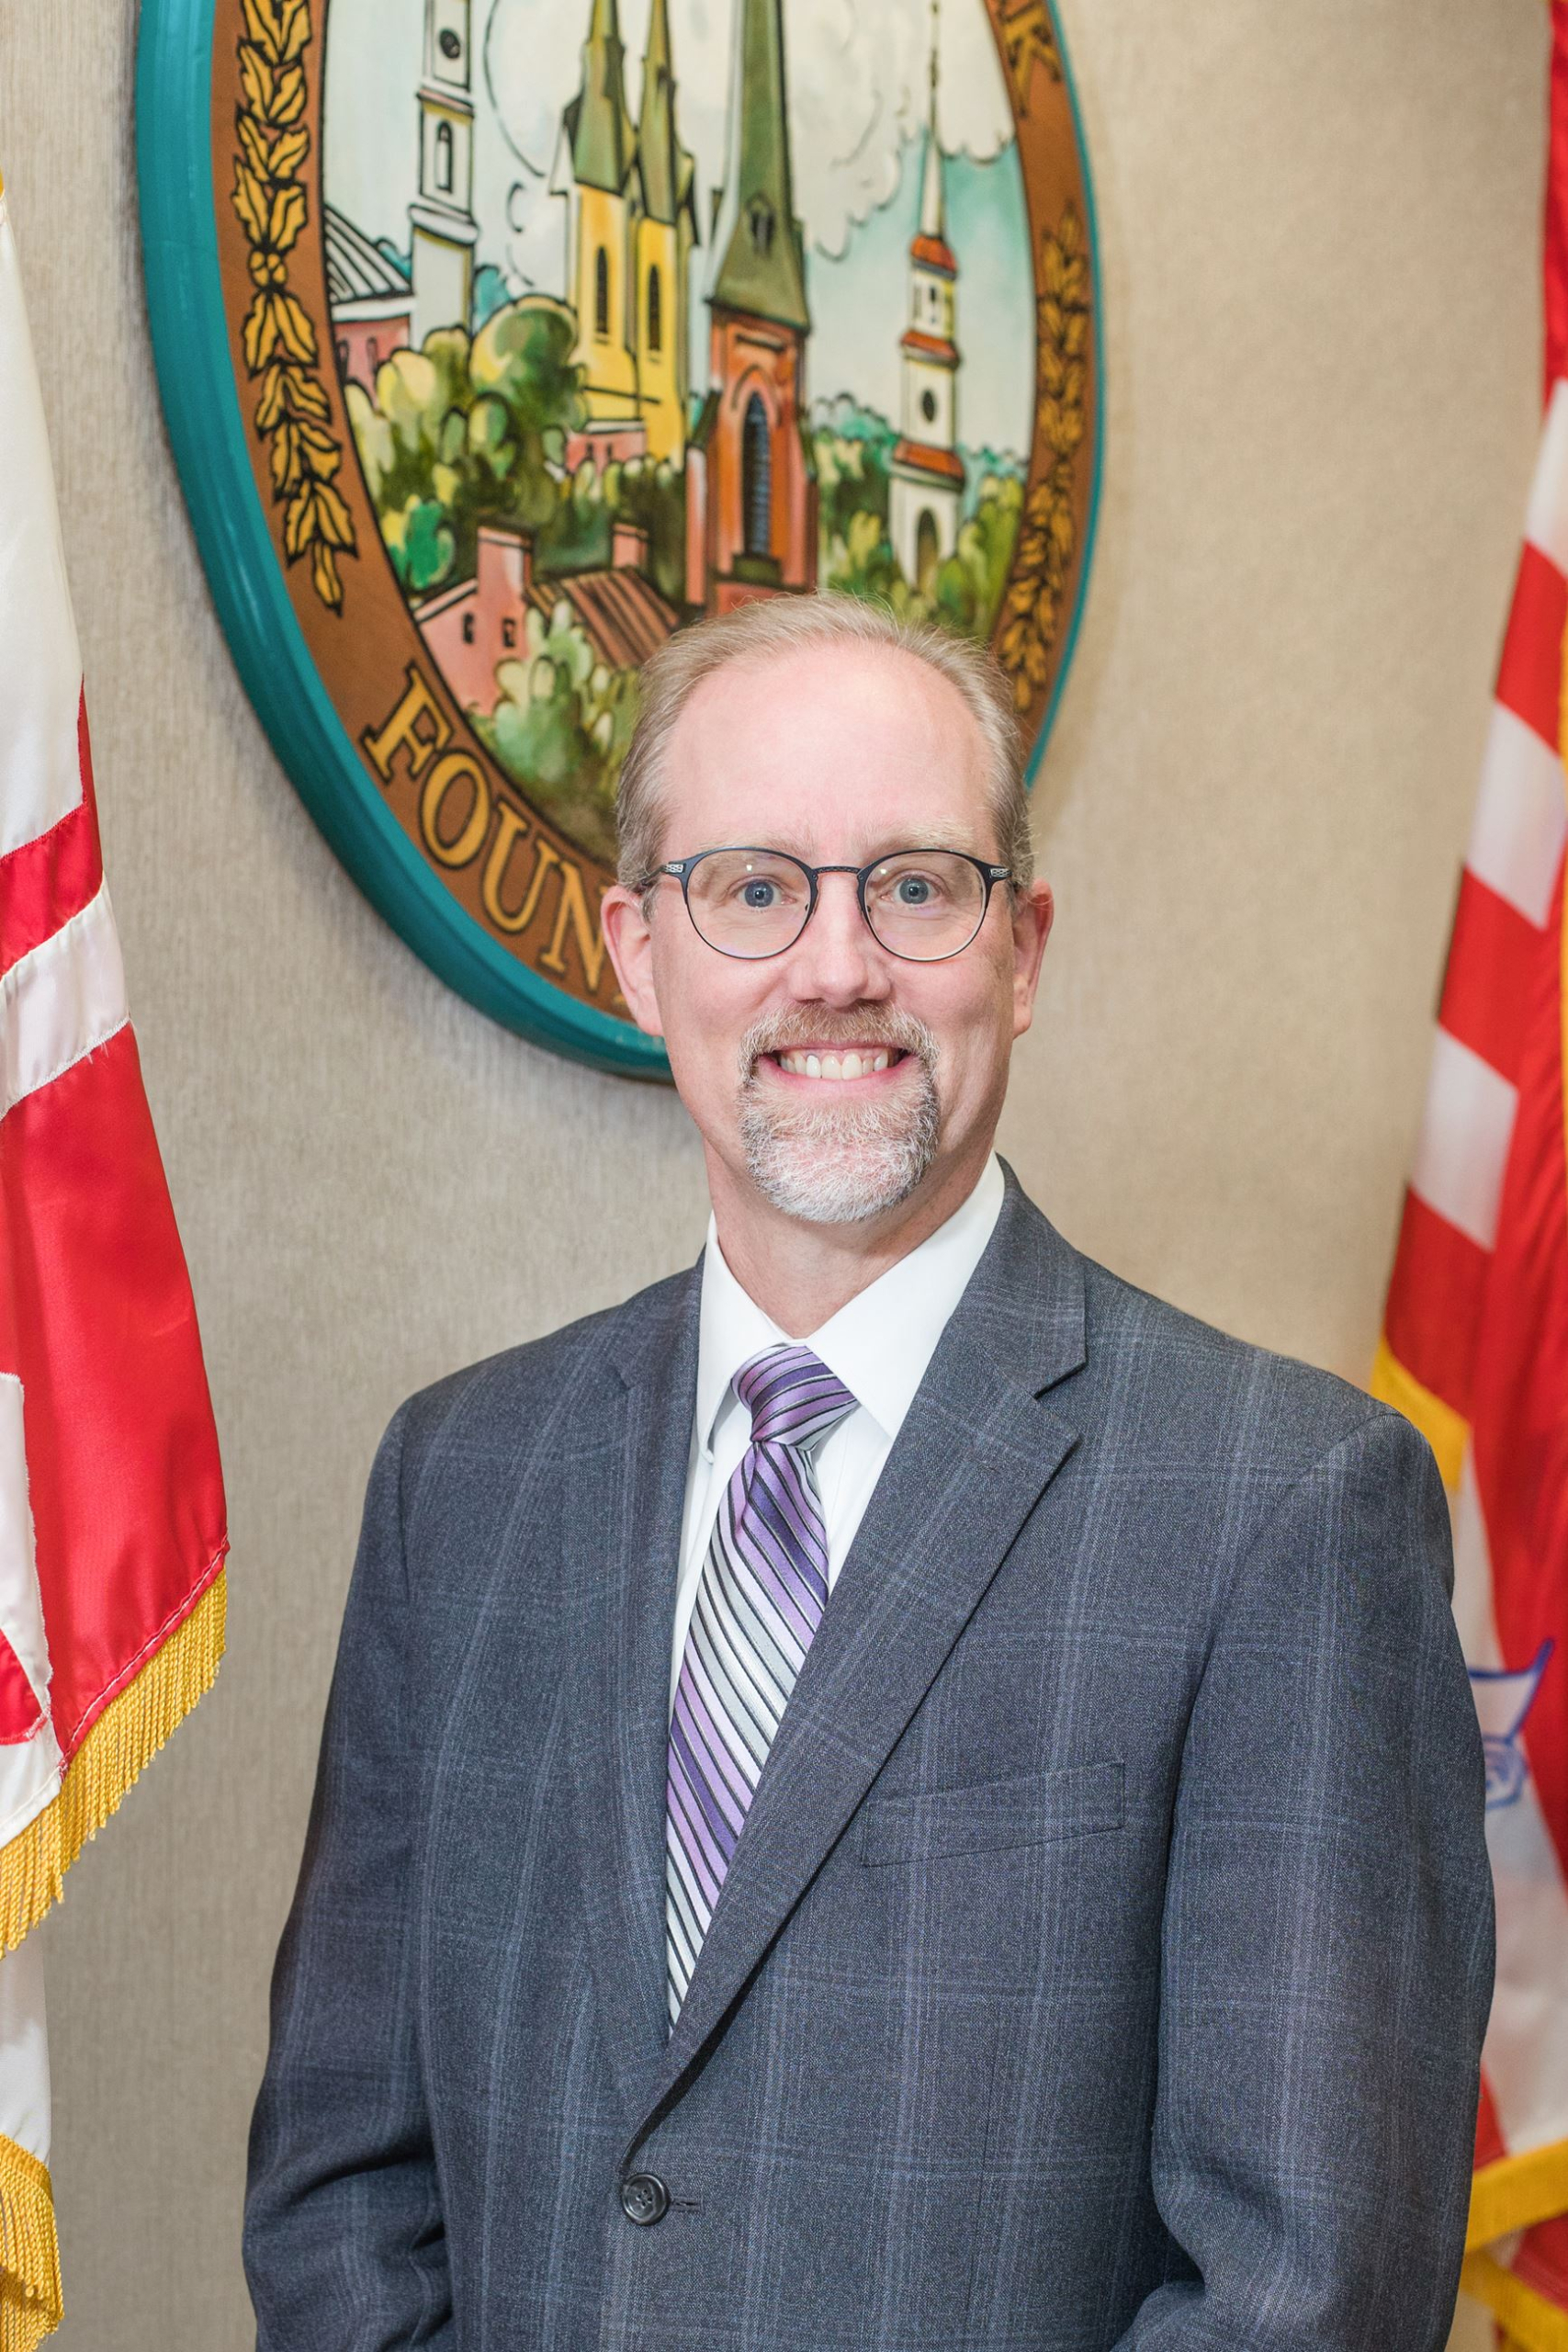 Frederick Mayor Introduces Fiscal Year 2023 Budget Totaling Over $197-Million